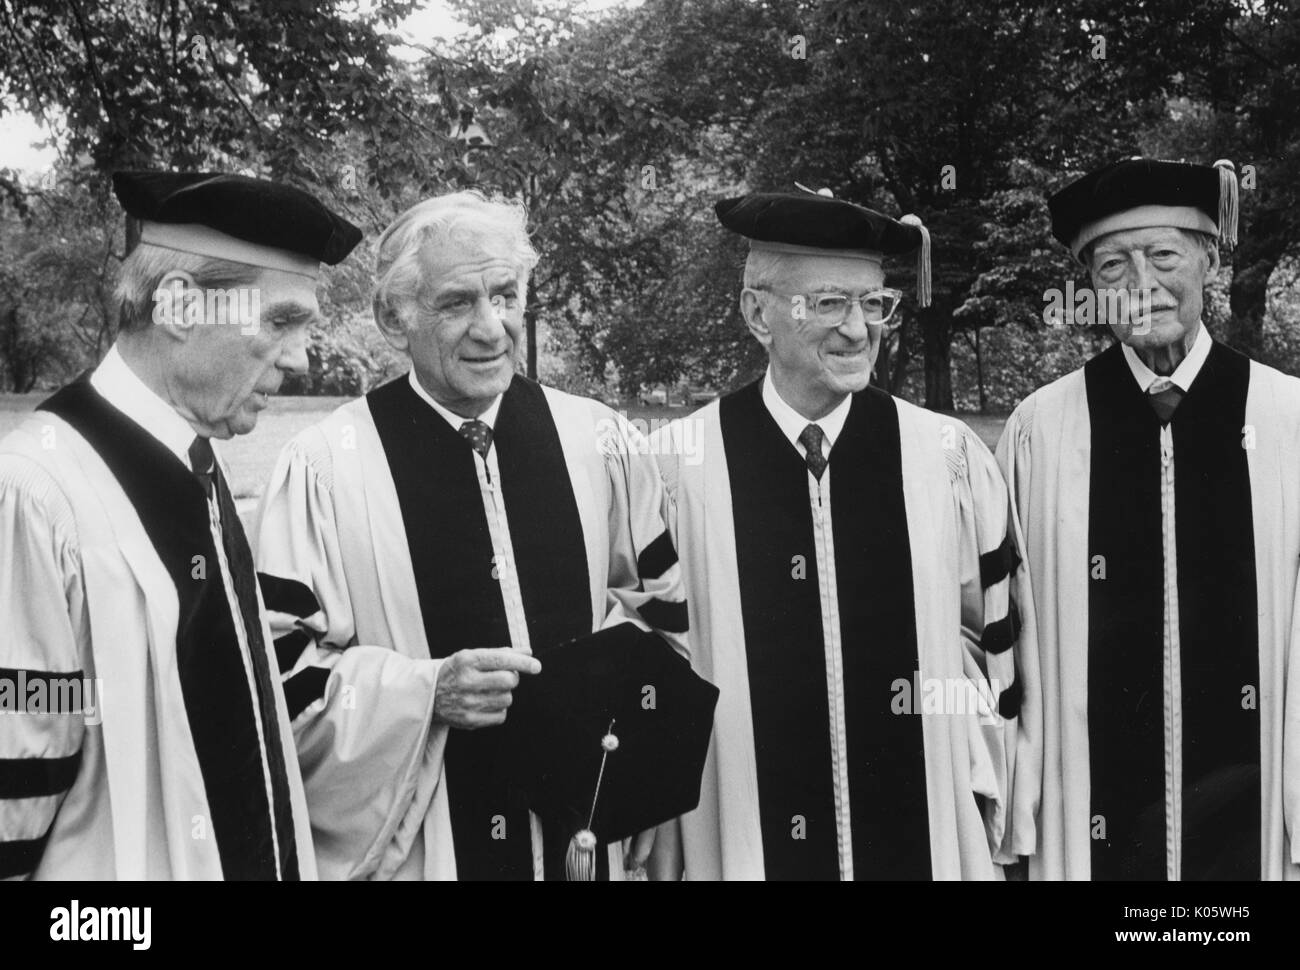 Half-length portrait of four men at Johns Hopkins commencement, all sporting cap and gown, standing outside, mostly smiling facial expressions, from left to right: Daniel K Ludwig, American composer and pianist Leonard Bernstein, Jules Stein, and Edward O Hulburt, 1980. Stock Photo